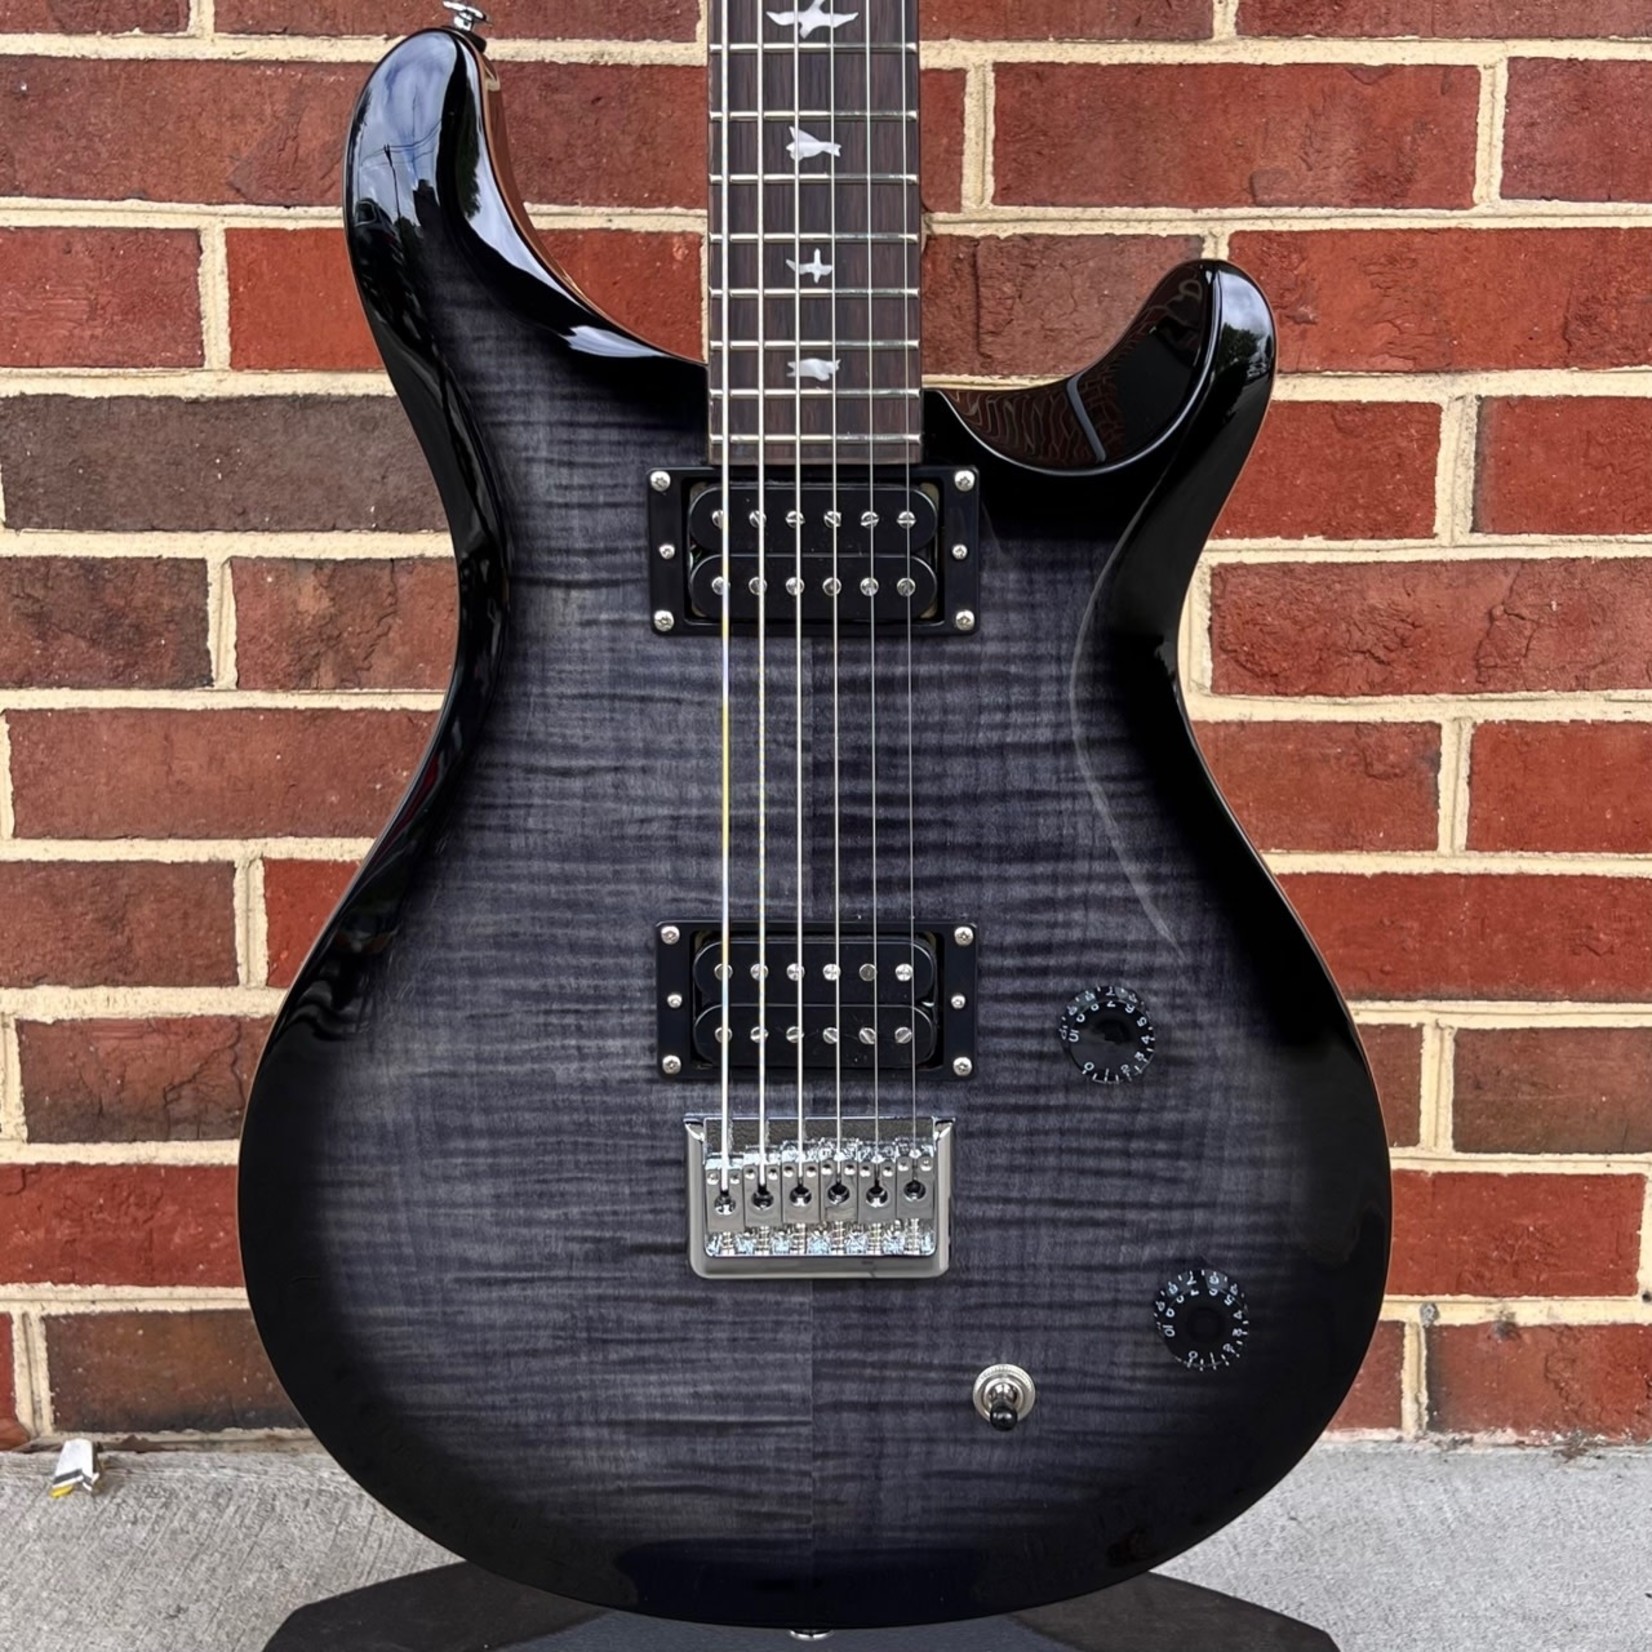 Paul Reed Smith Paul Reed Smith SE 277, Charcoal Burst, Baritone 27" Scale Length, Carved Top, Gig Bag, SN# CTIE82073